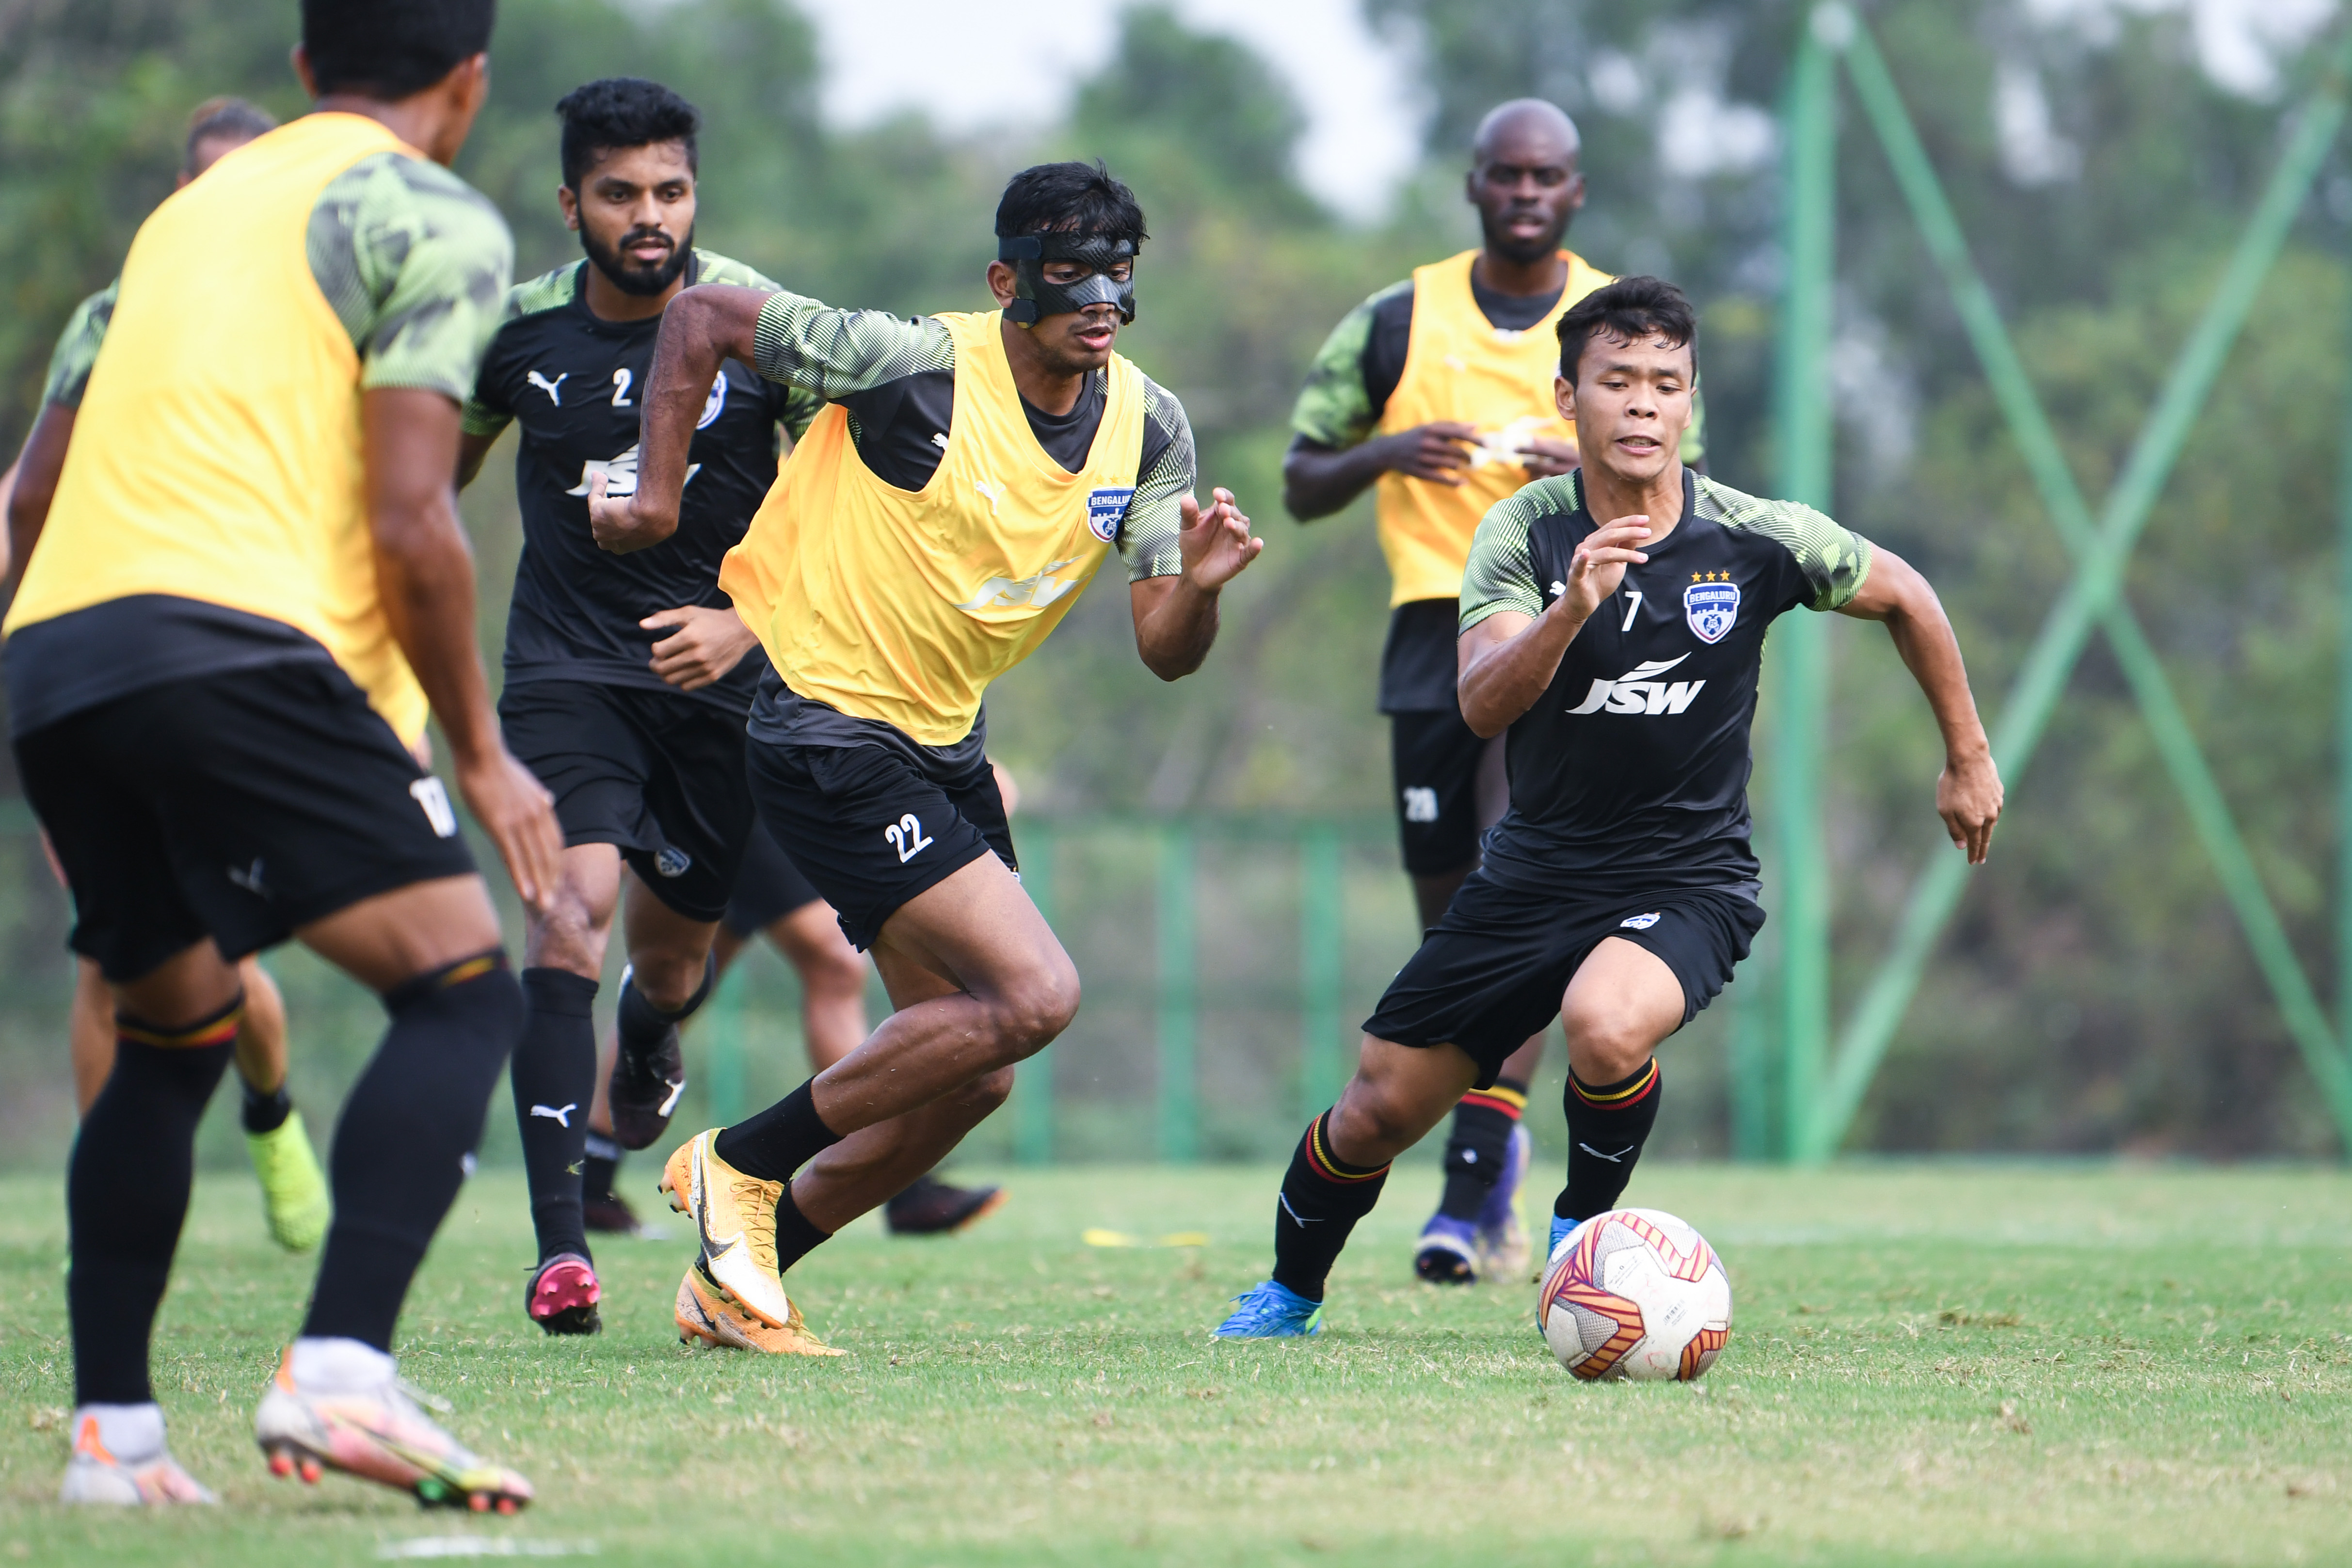 2021 AFC Cup | Sunil Chhetri to lead Bengaluru FC after recovering from Covid-19